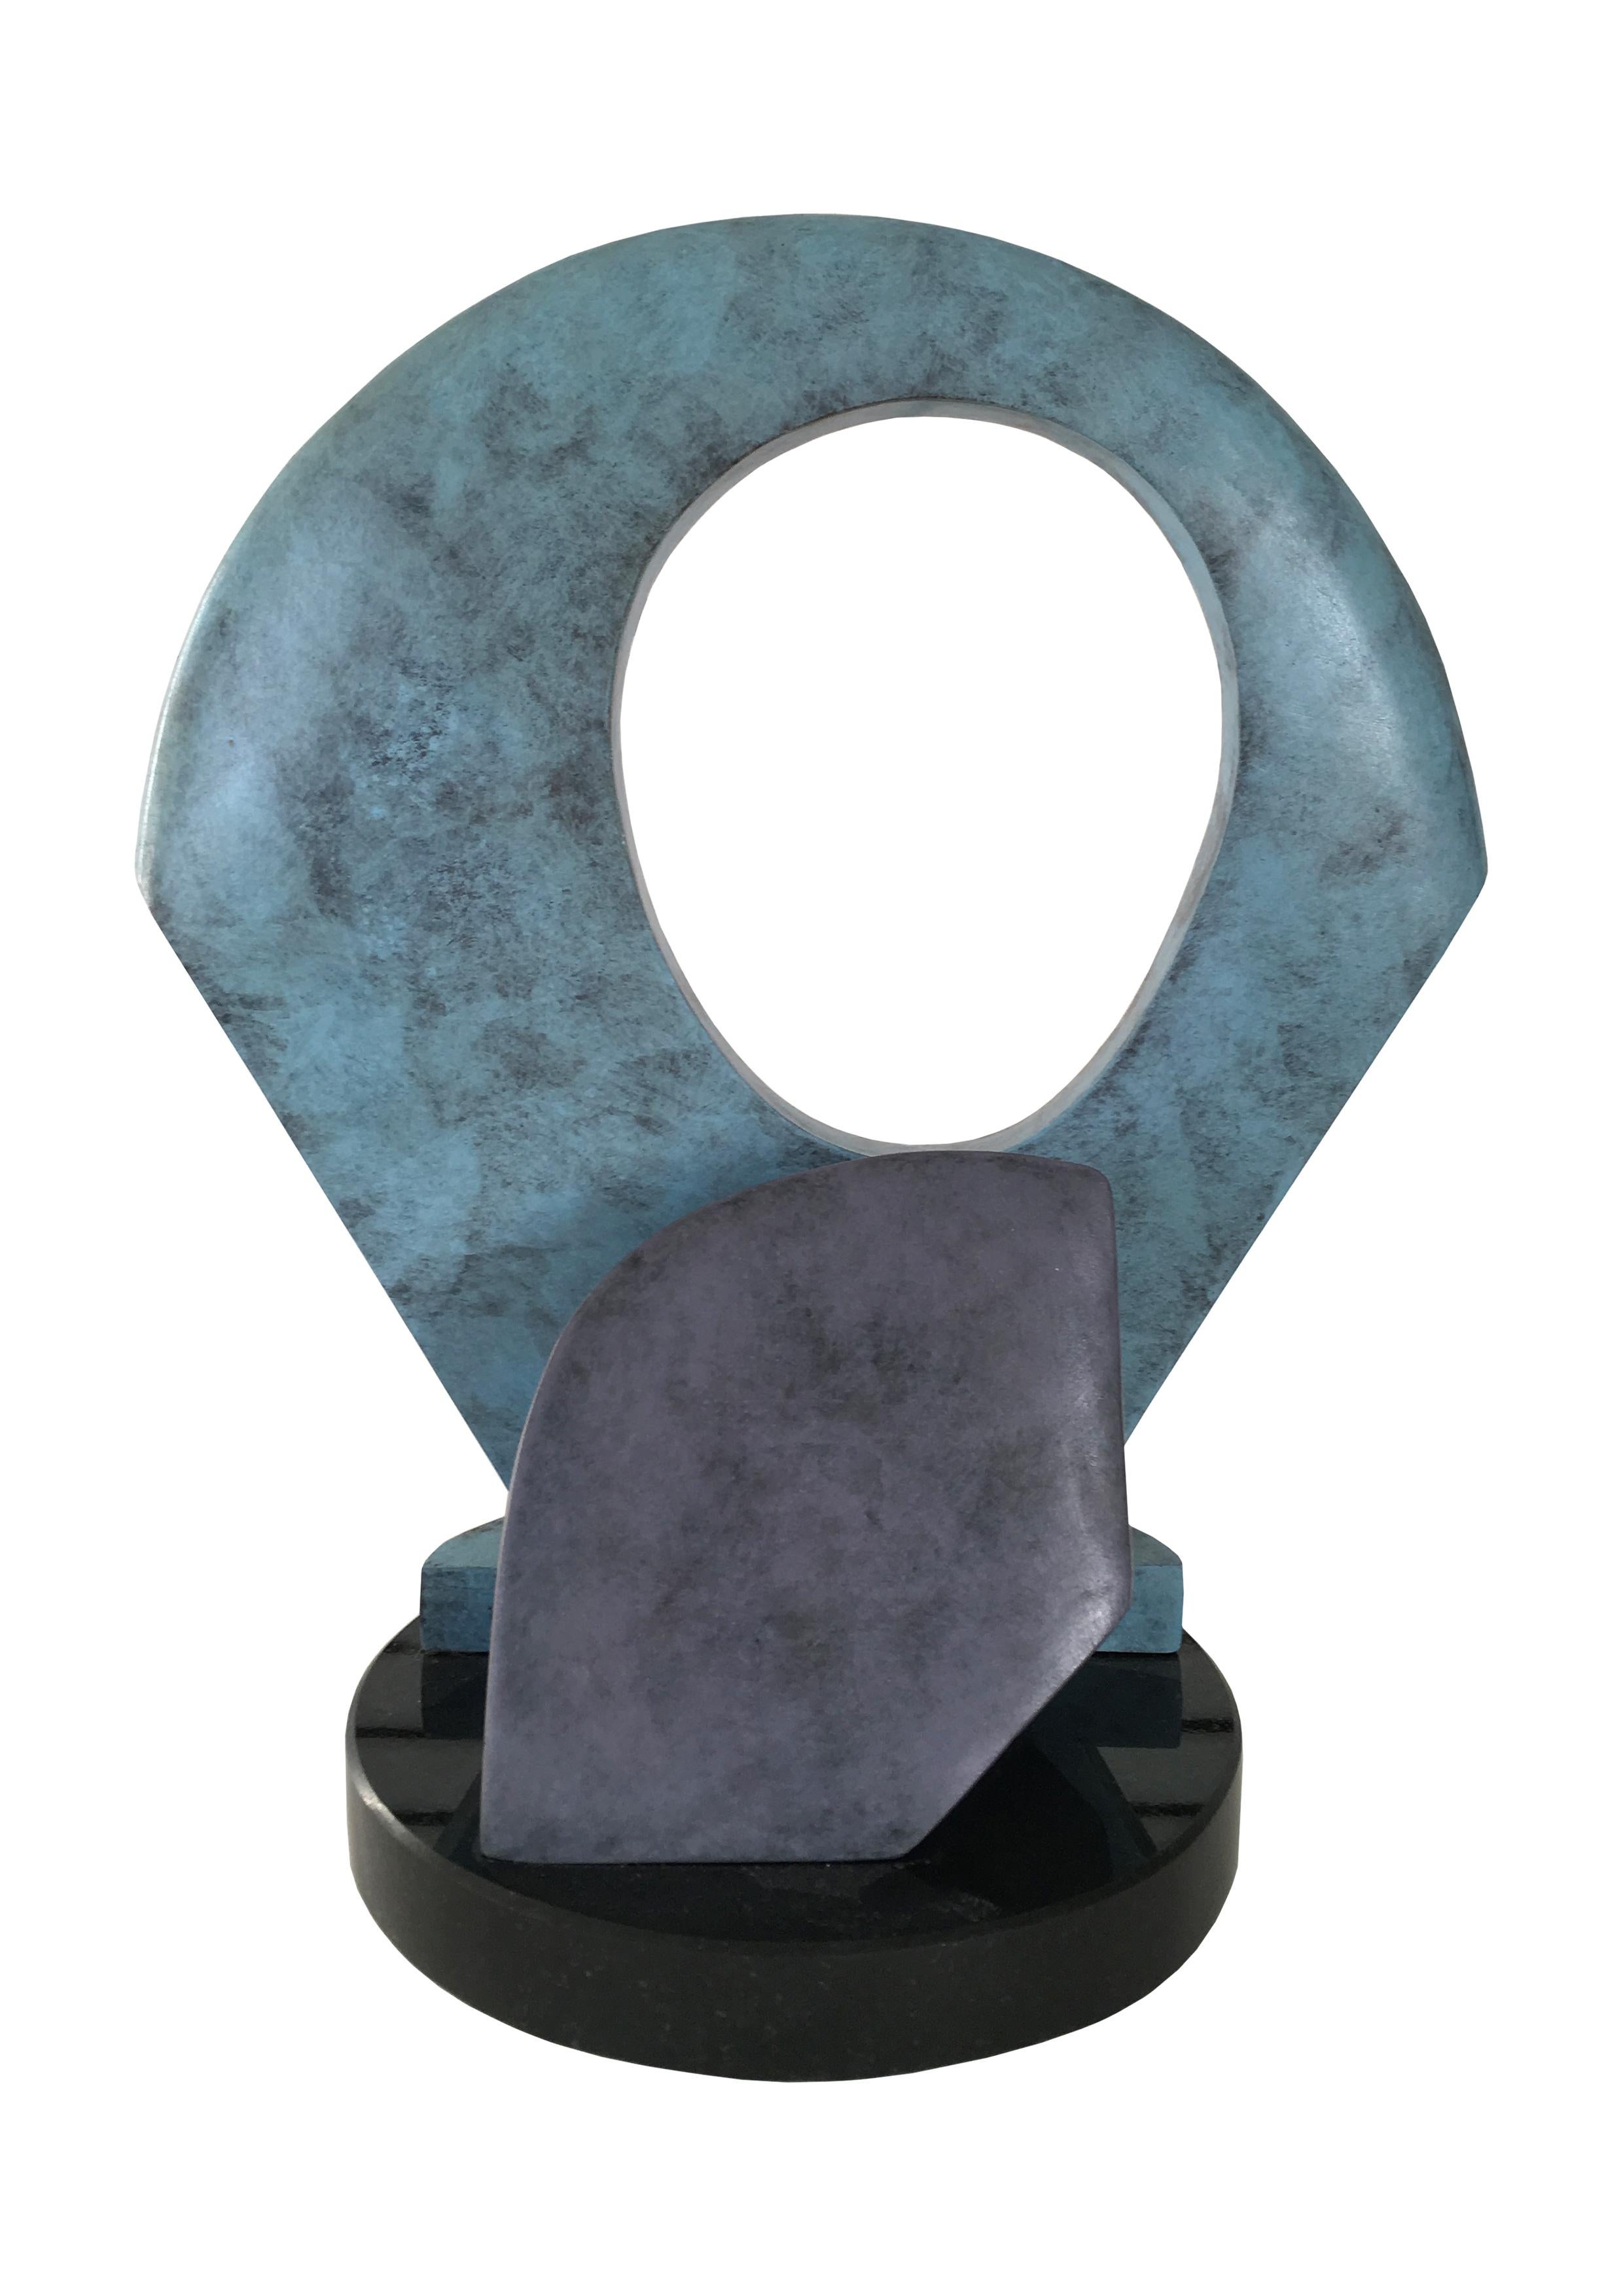 Limited Edition: 1/4

"Flint Forms" by David Sprakes is an original table-top bronze sculpture that mesmerizes with its abstract interpretation of shape and texture. Crafted in bronze and offered in a limited edition, this artwork showcases Sprakes'